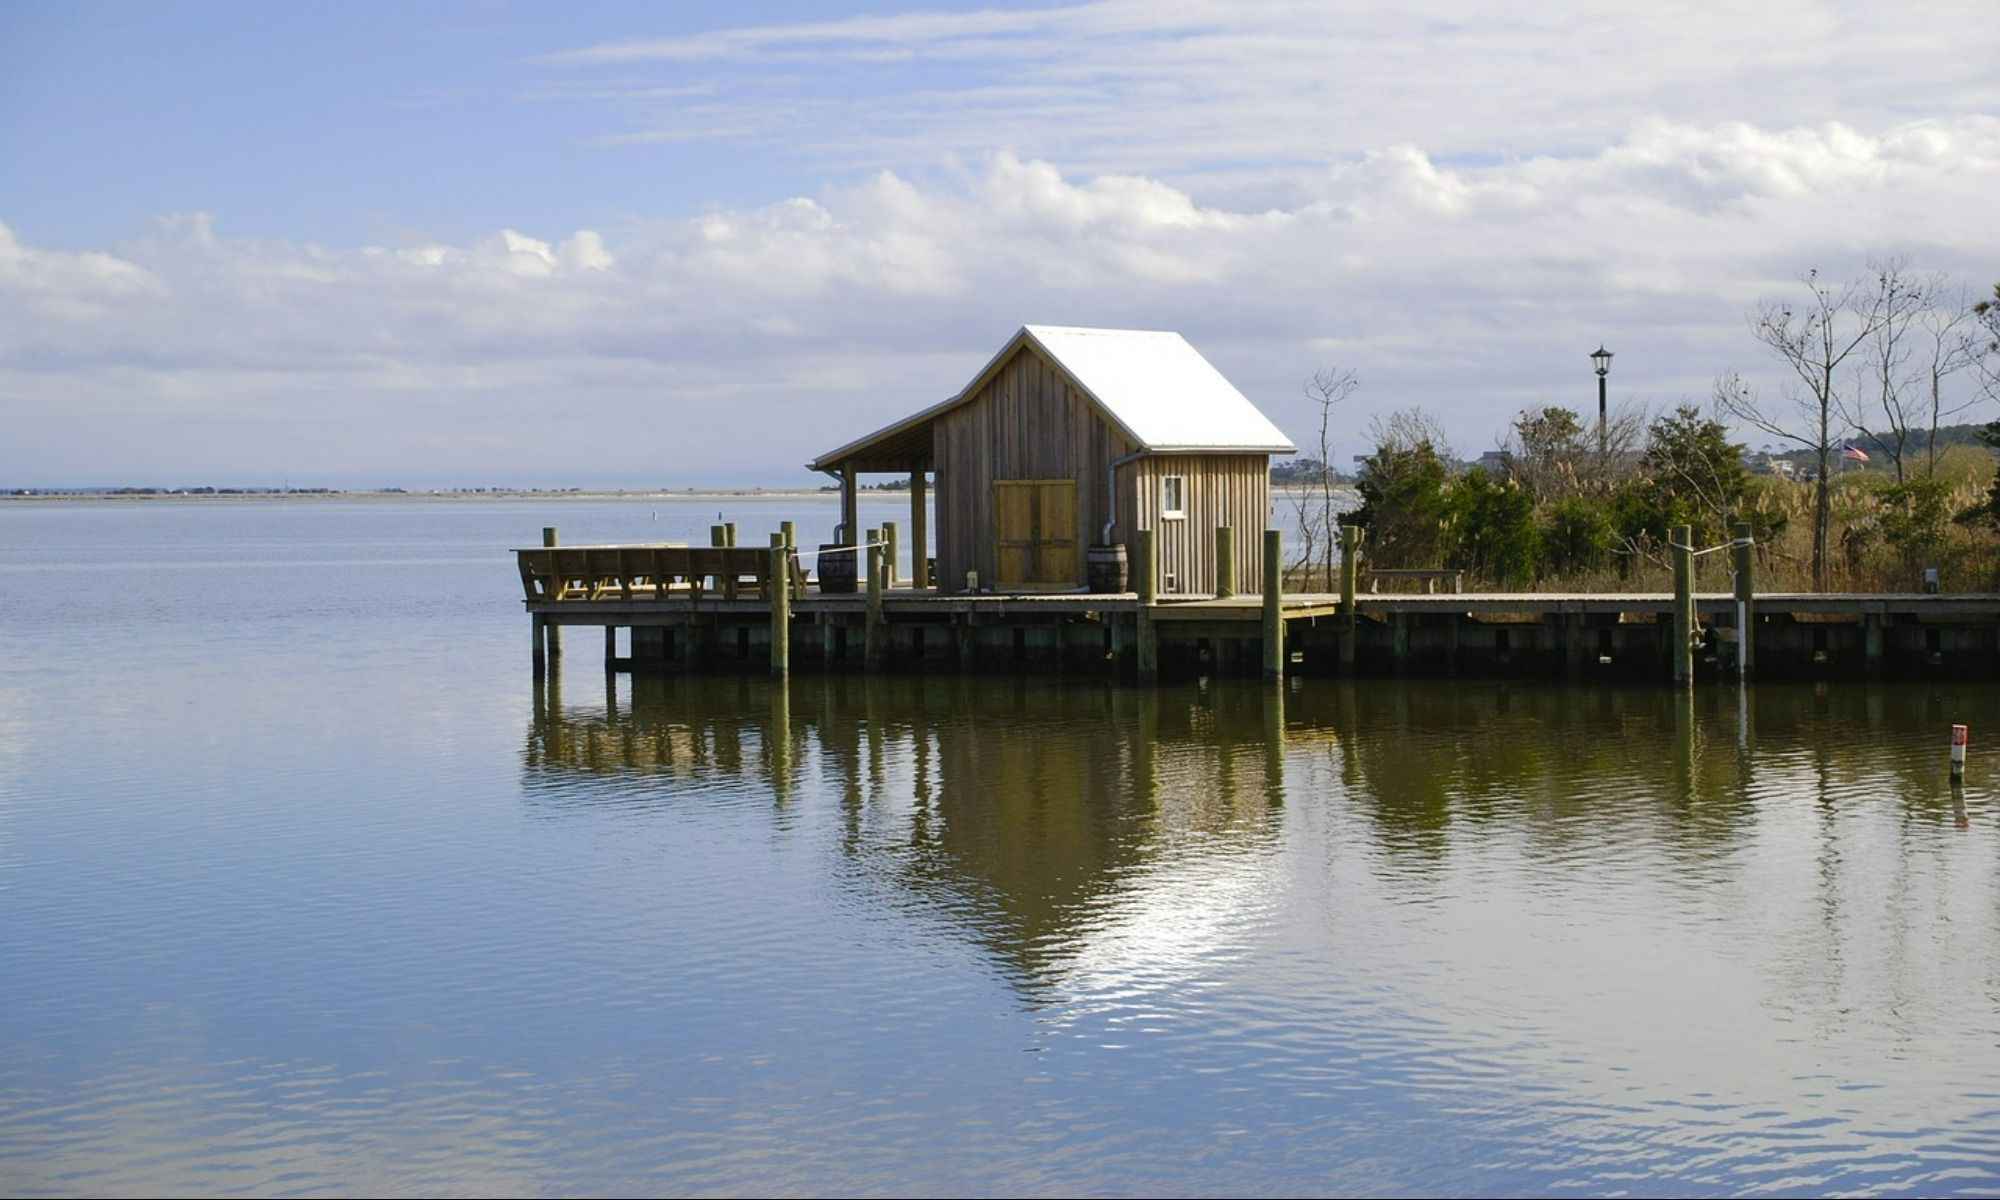 Manteo, NC Fishing: The Mysterious Town in North Carolina